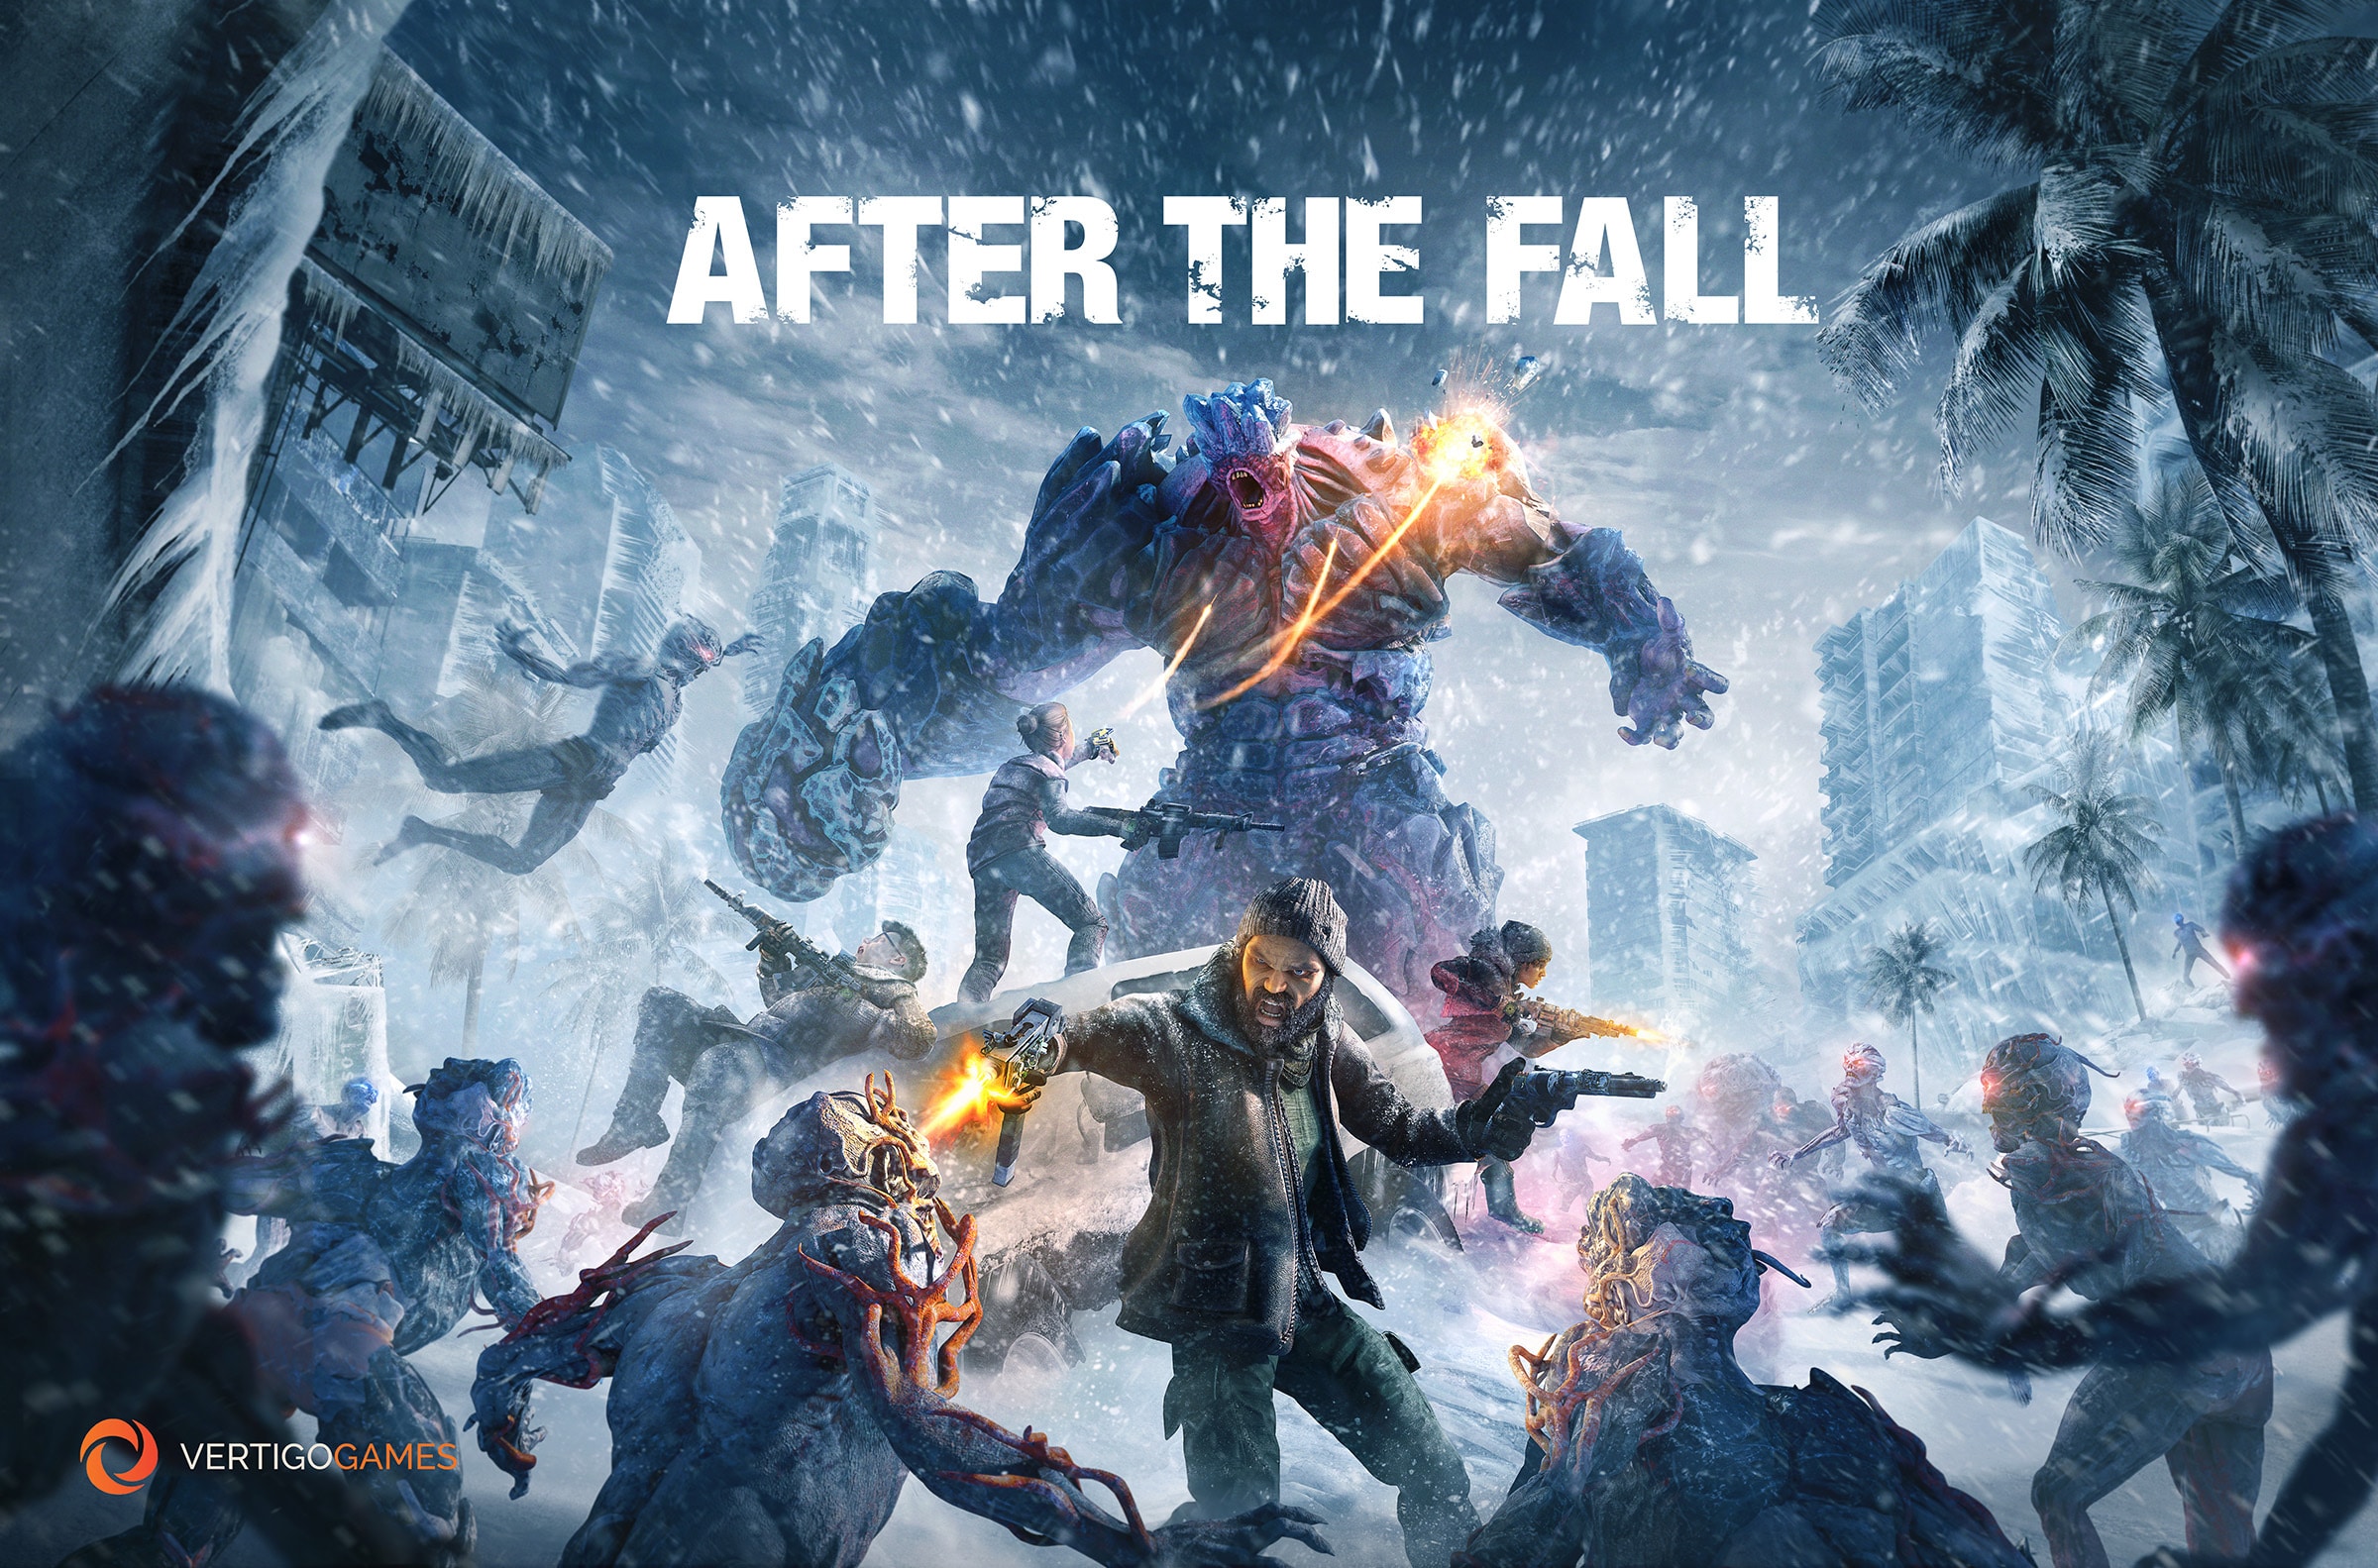 After The Fall is out today: release trailer and first images of the new survival in VR thumbnail